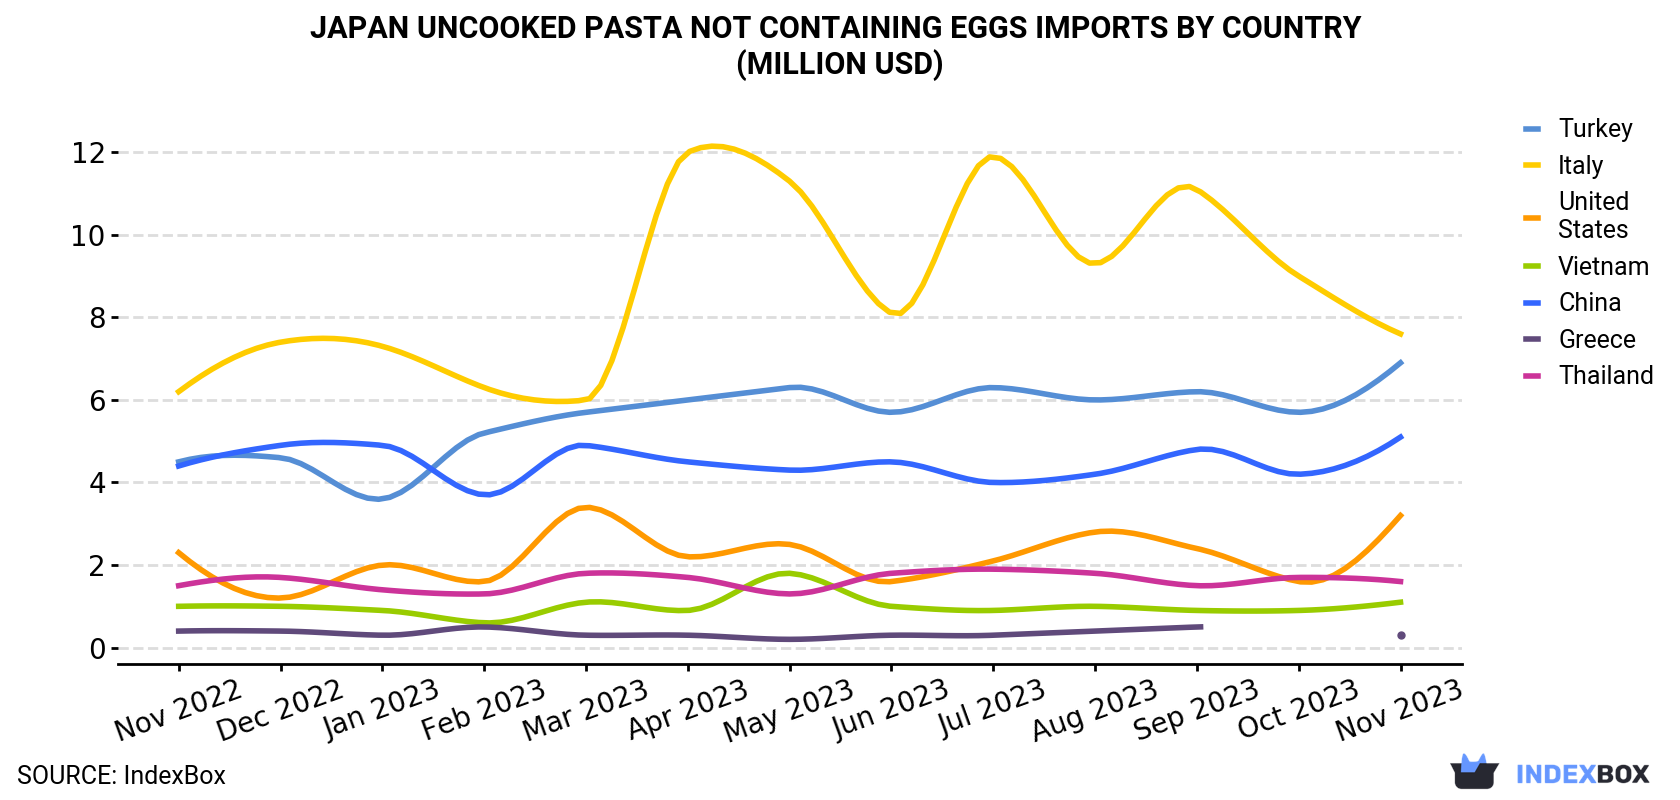 Japan Uncooked Pasta not Containing Eggs Imports By Country (Million USD)